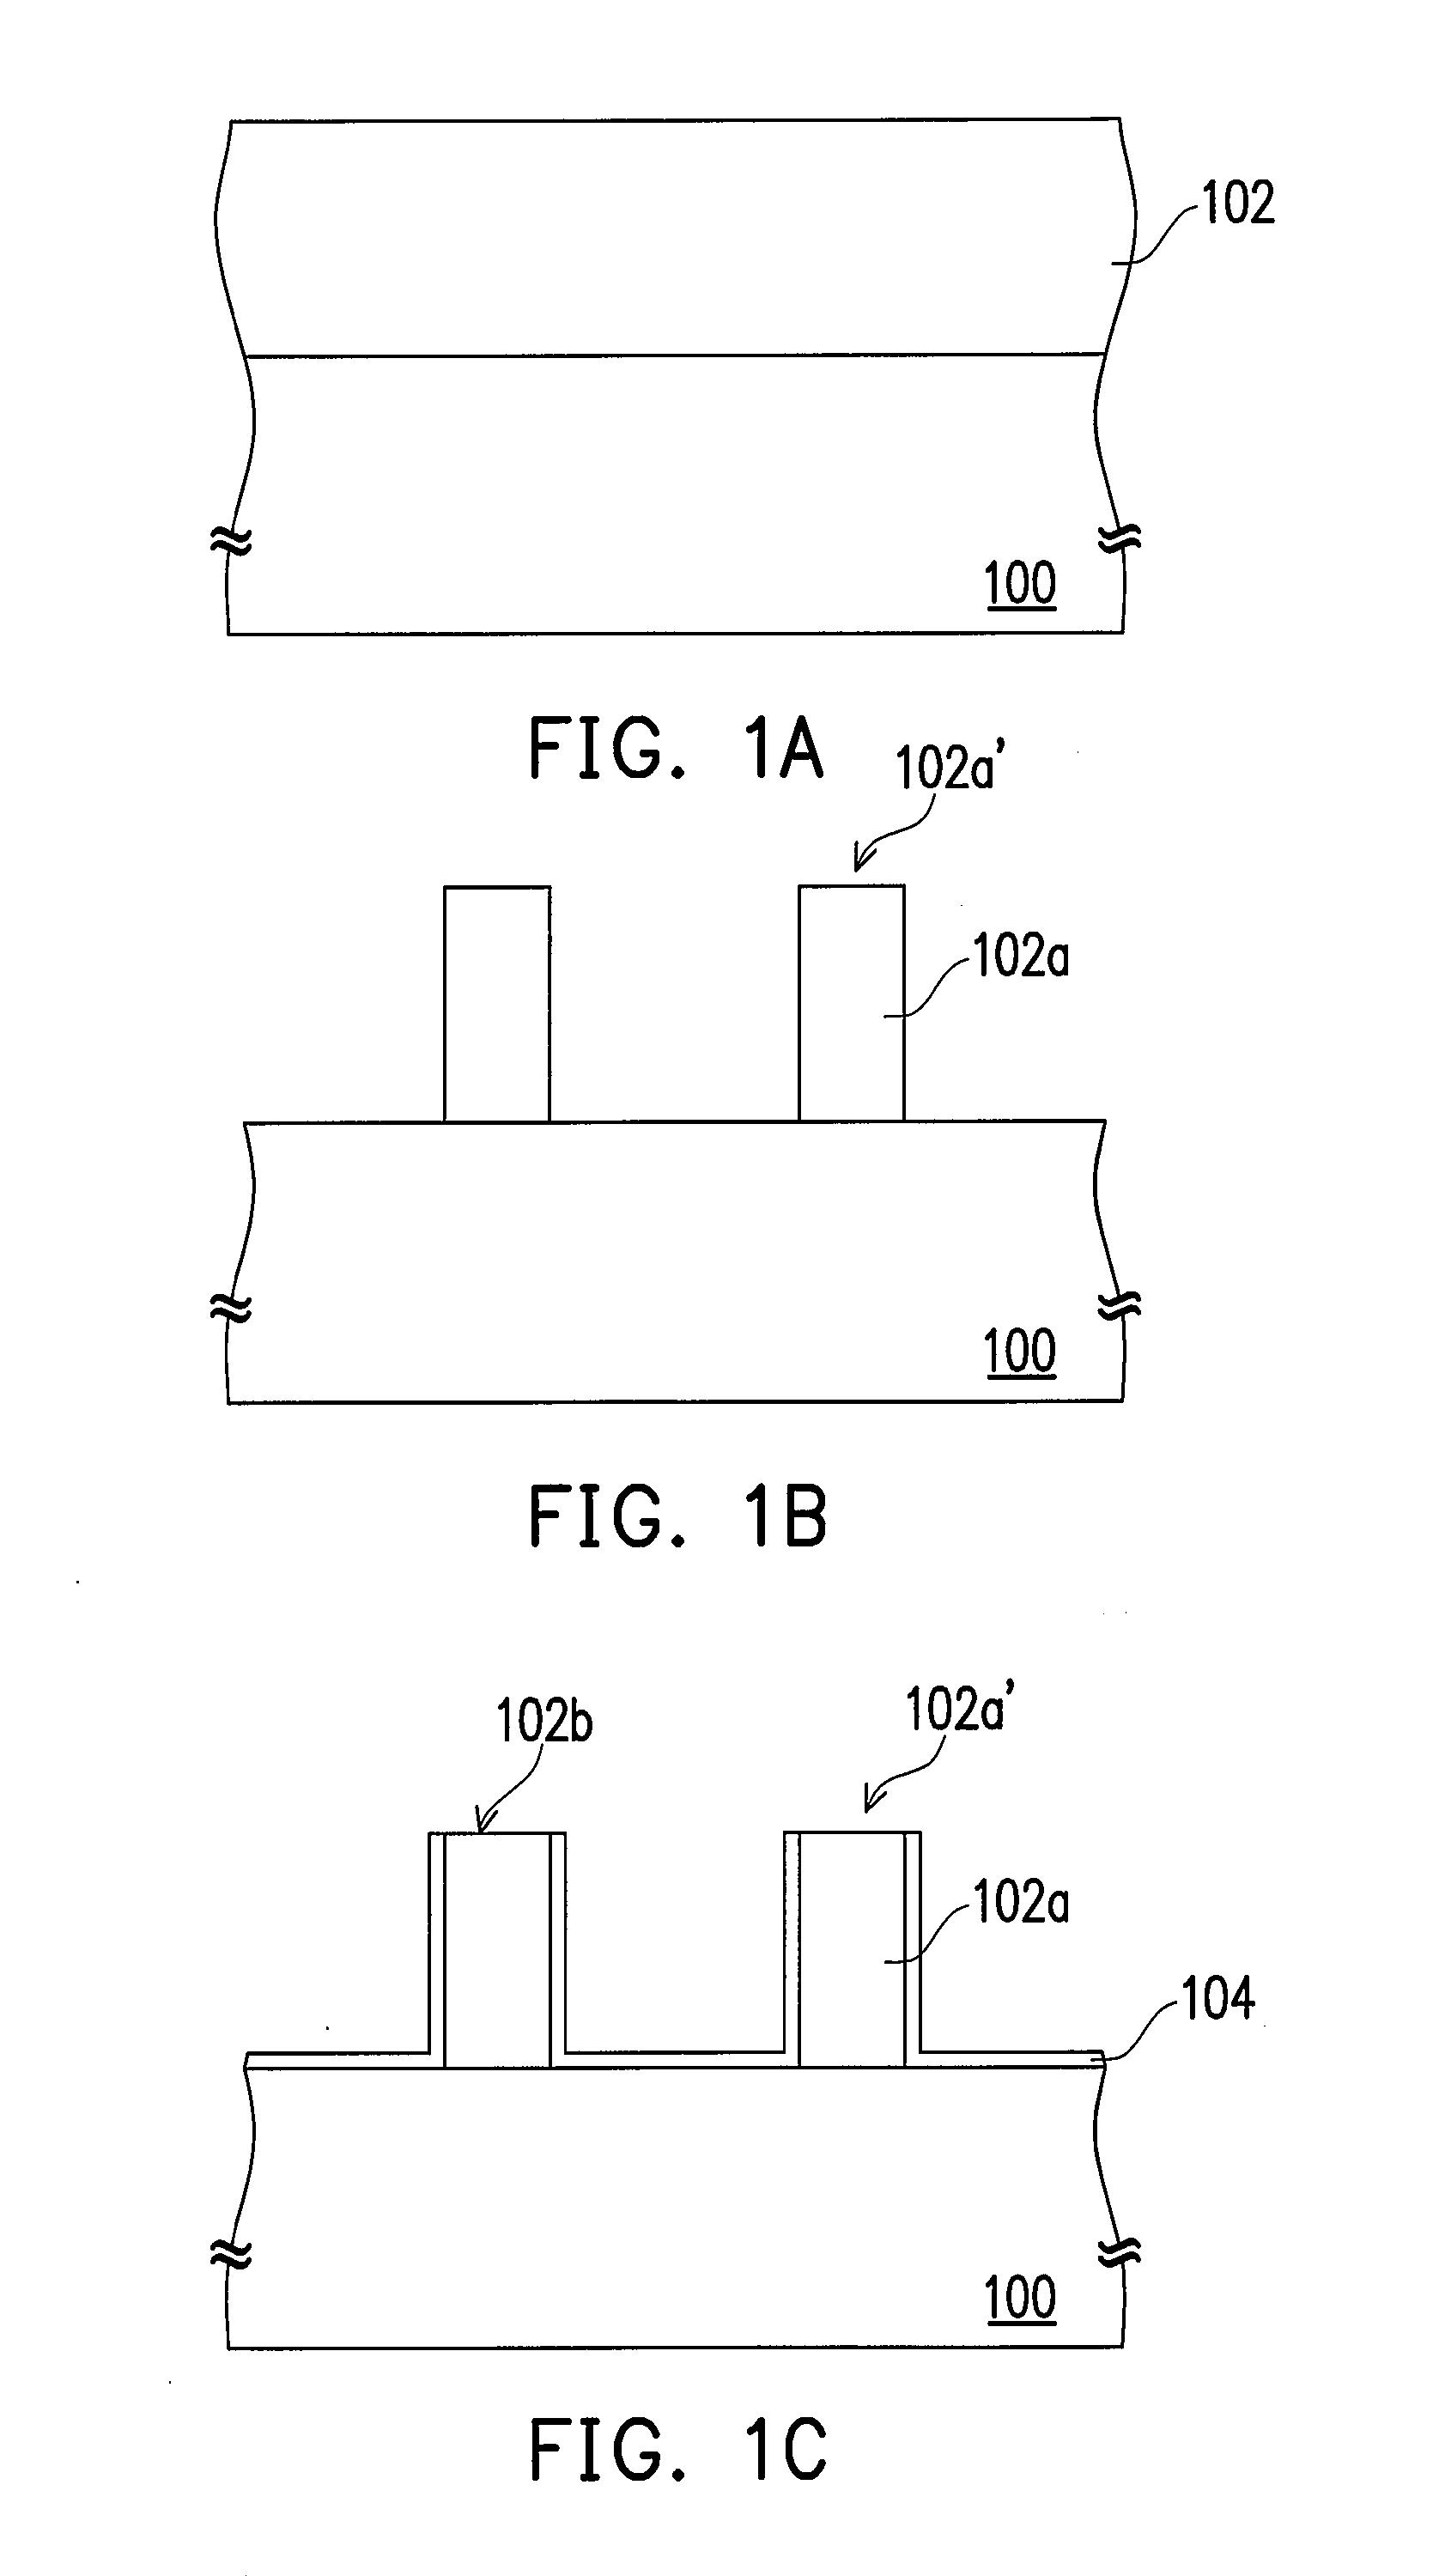 Nitride semiconductor substrate, method for forming a nitride semiconductor layer and method for separating the nitride semiconductor layer from the substrate